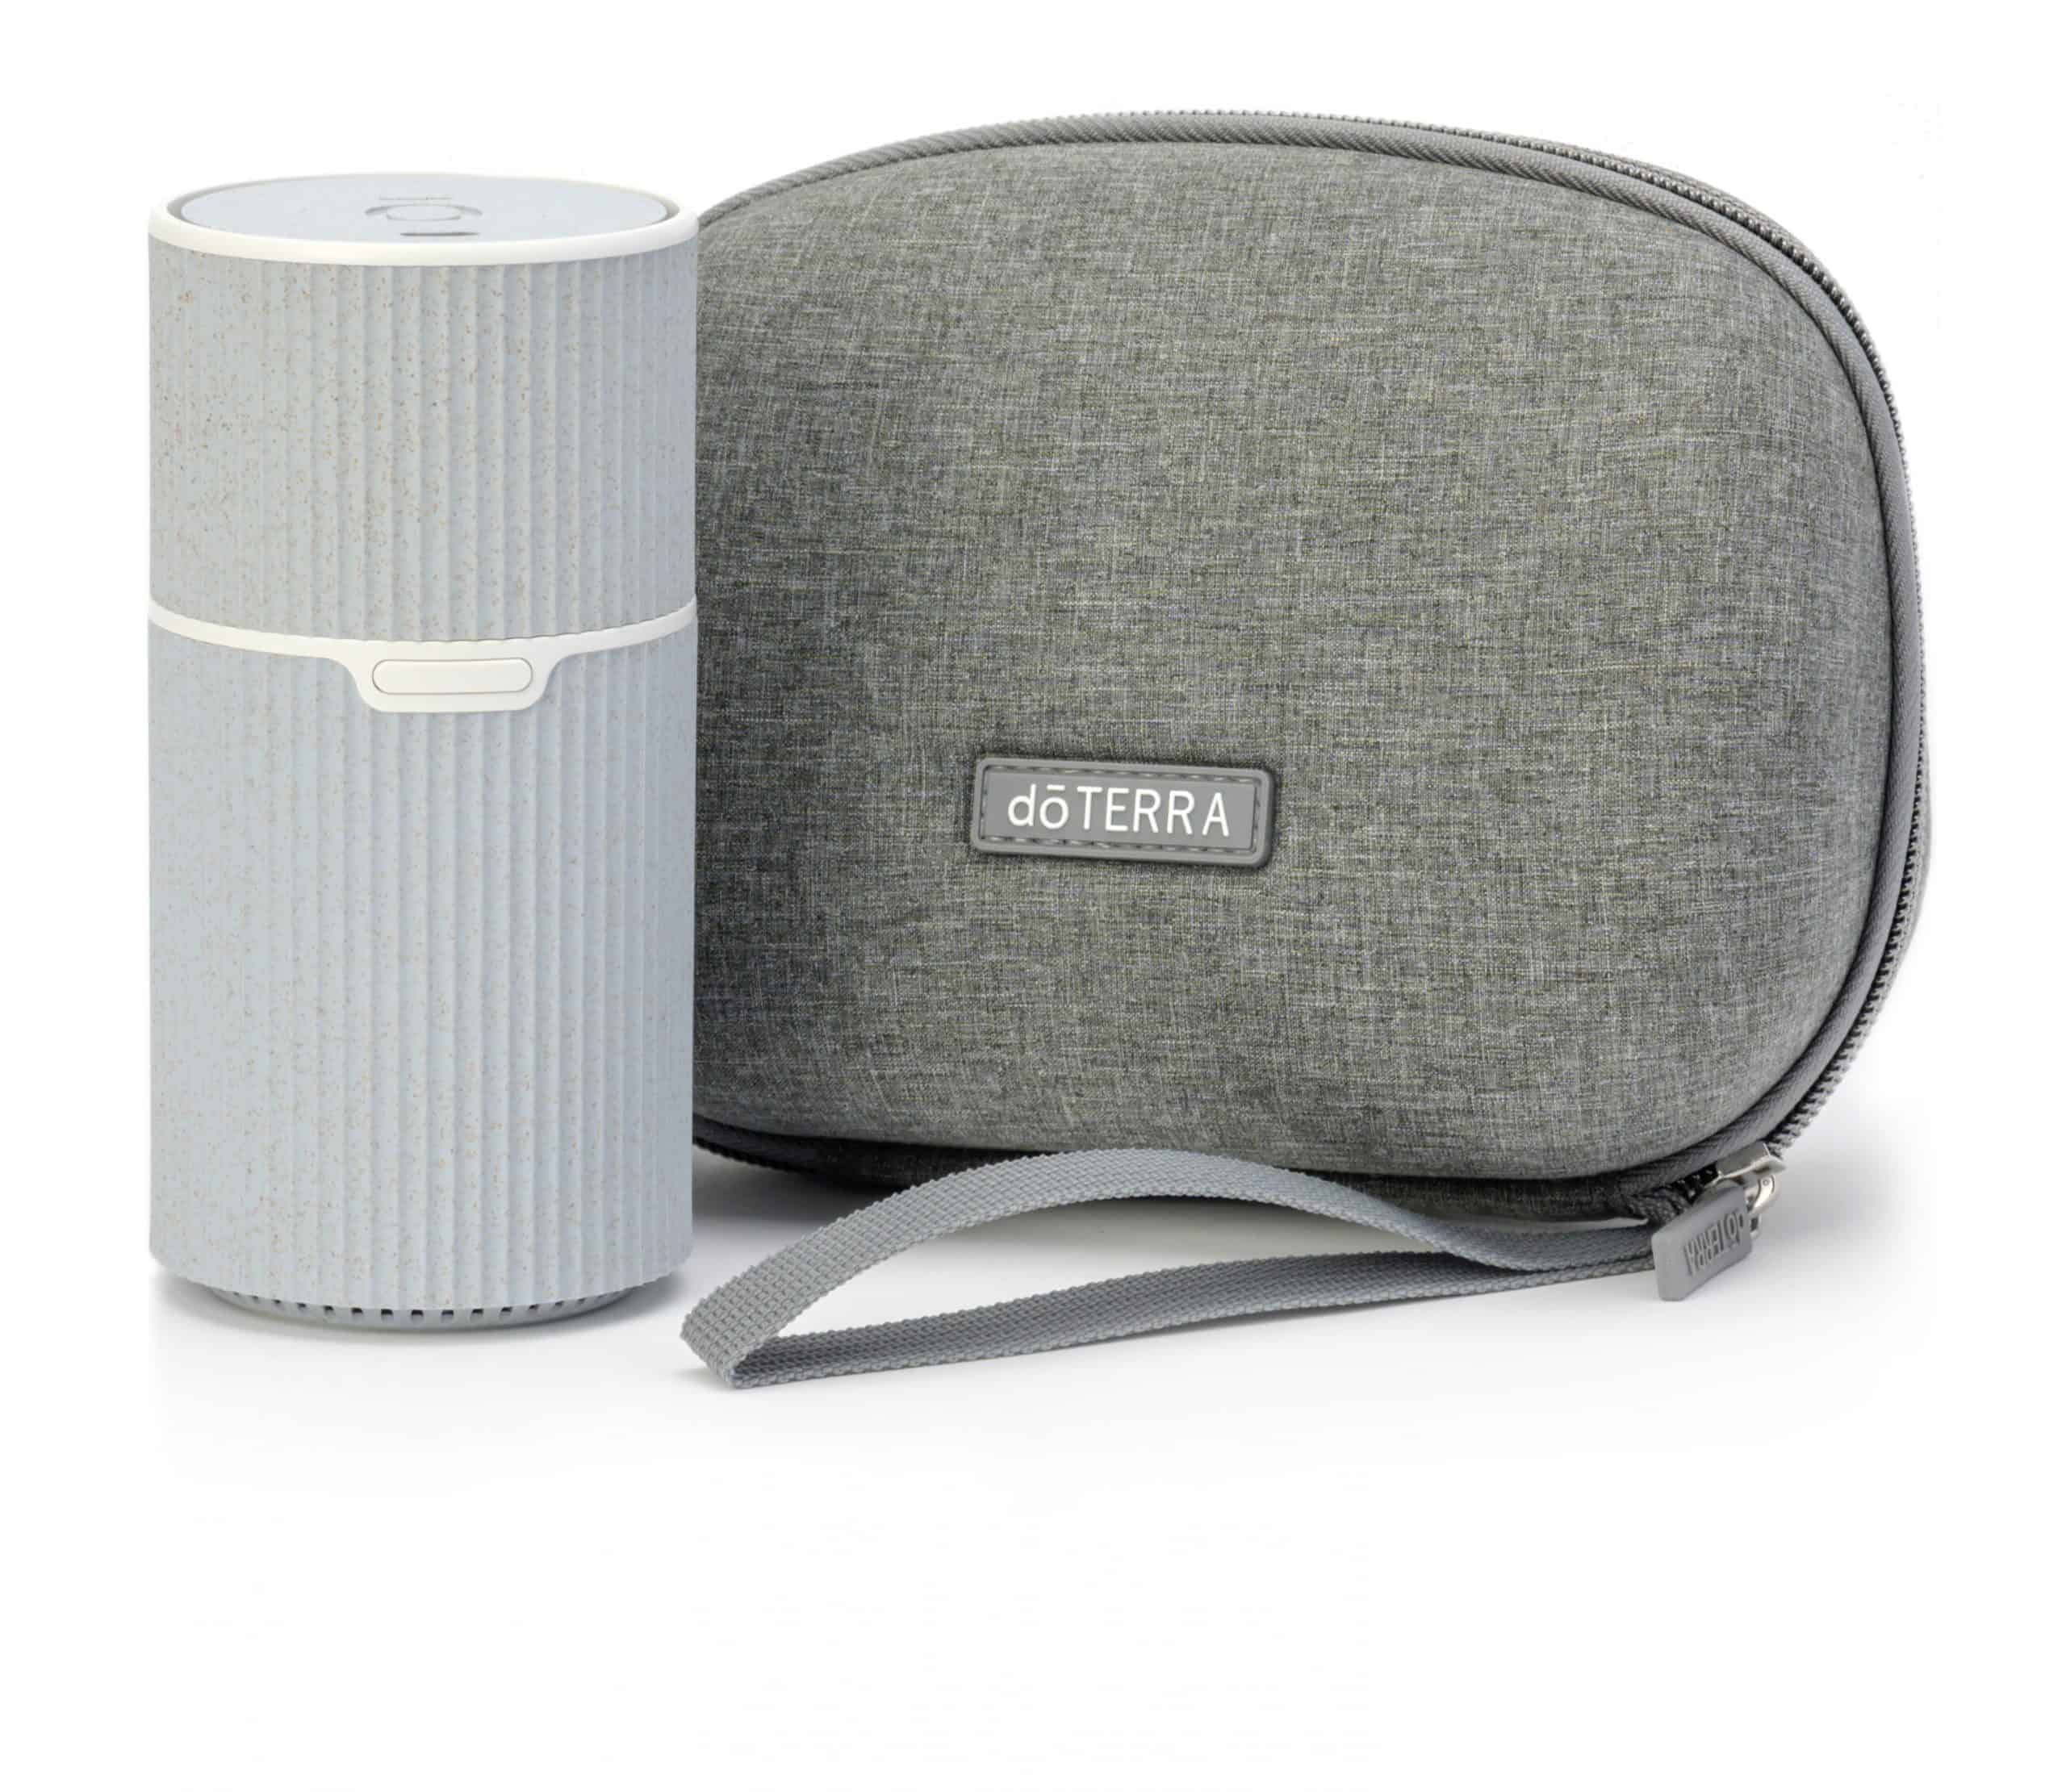 the doterra pilot diffuser is a portable rechargeable diffuser